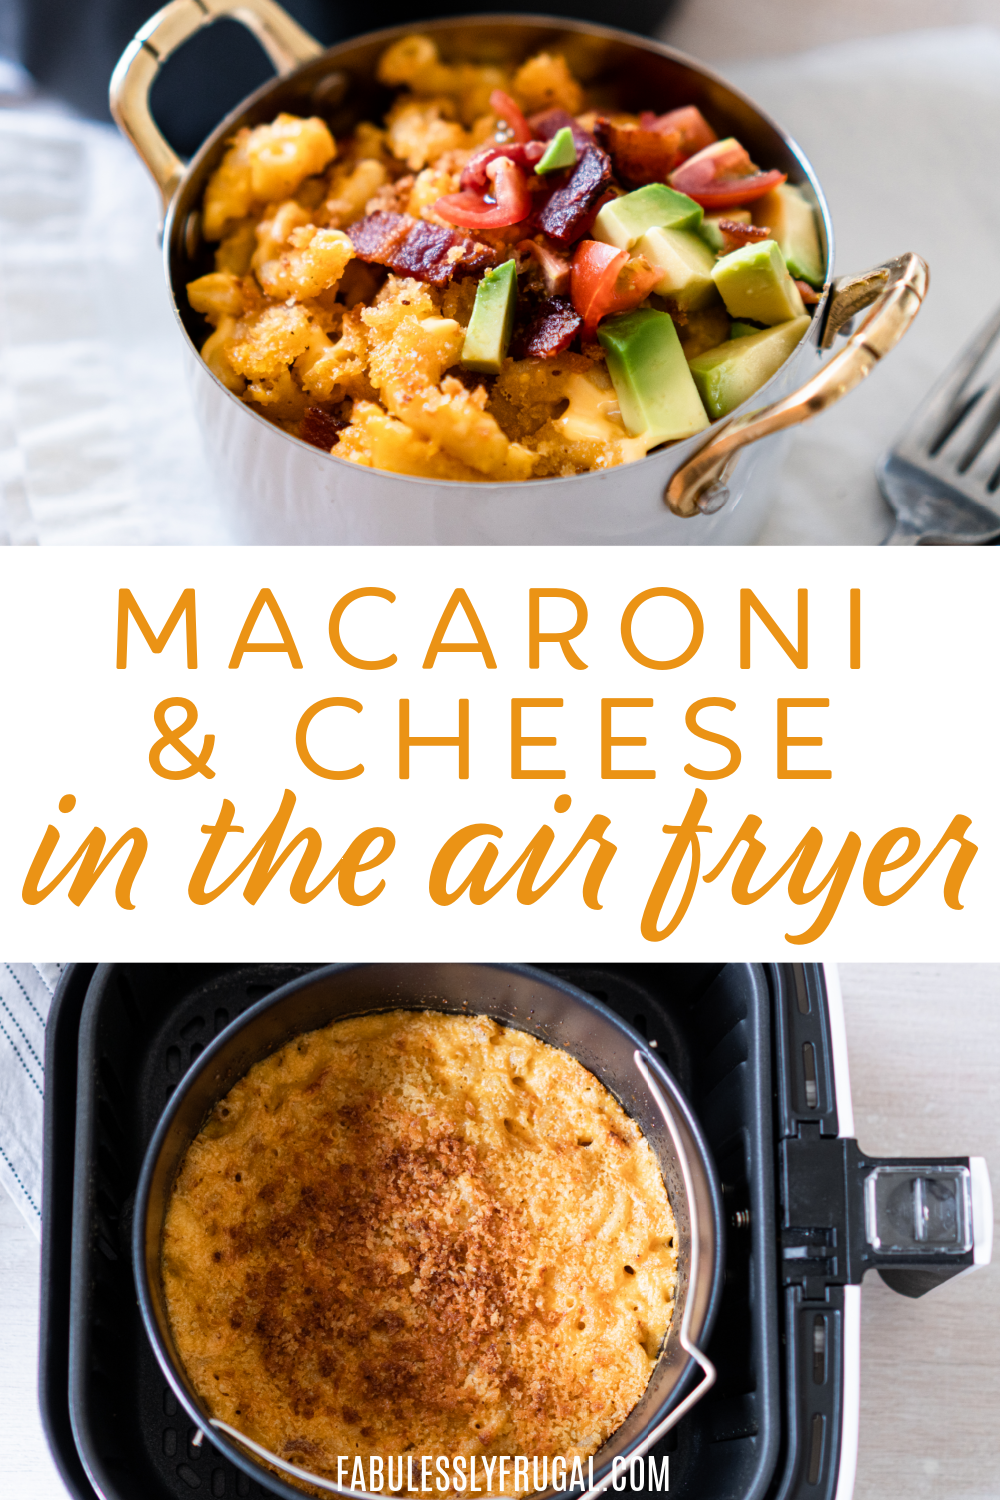 Macaroni and cheese in the air fryer is the best mac and cheese ever!